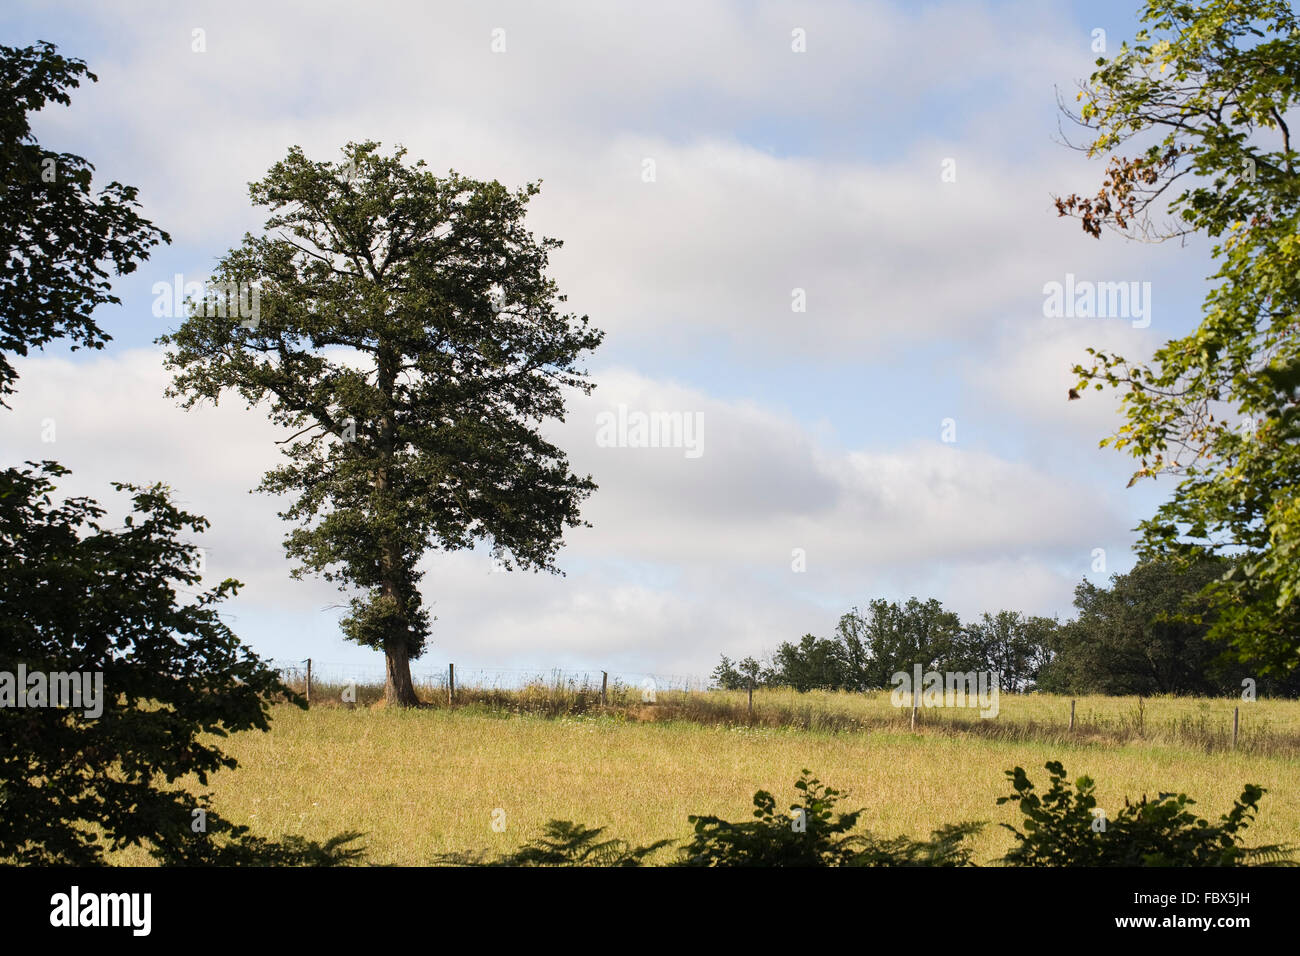 Quercus tree. Summer Oak tree in the French countryside. Stock Photo